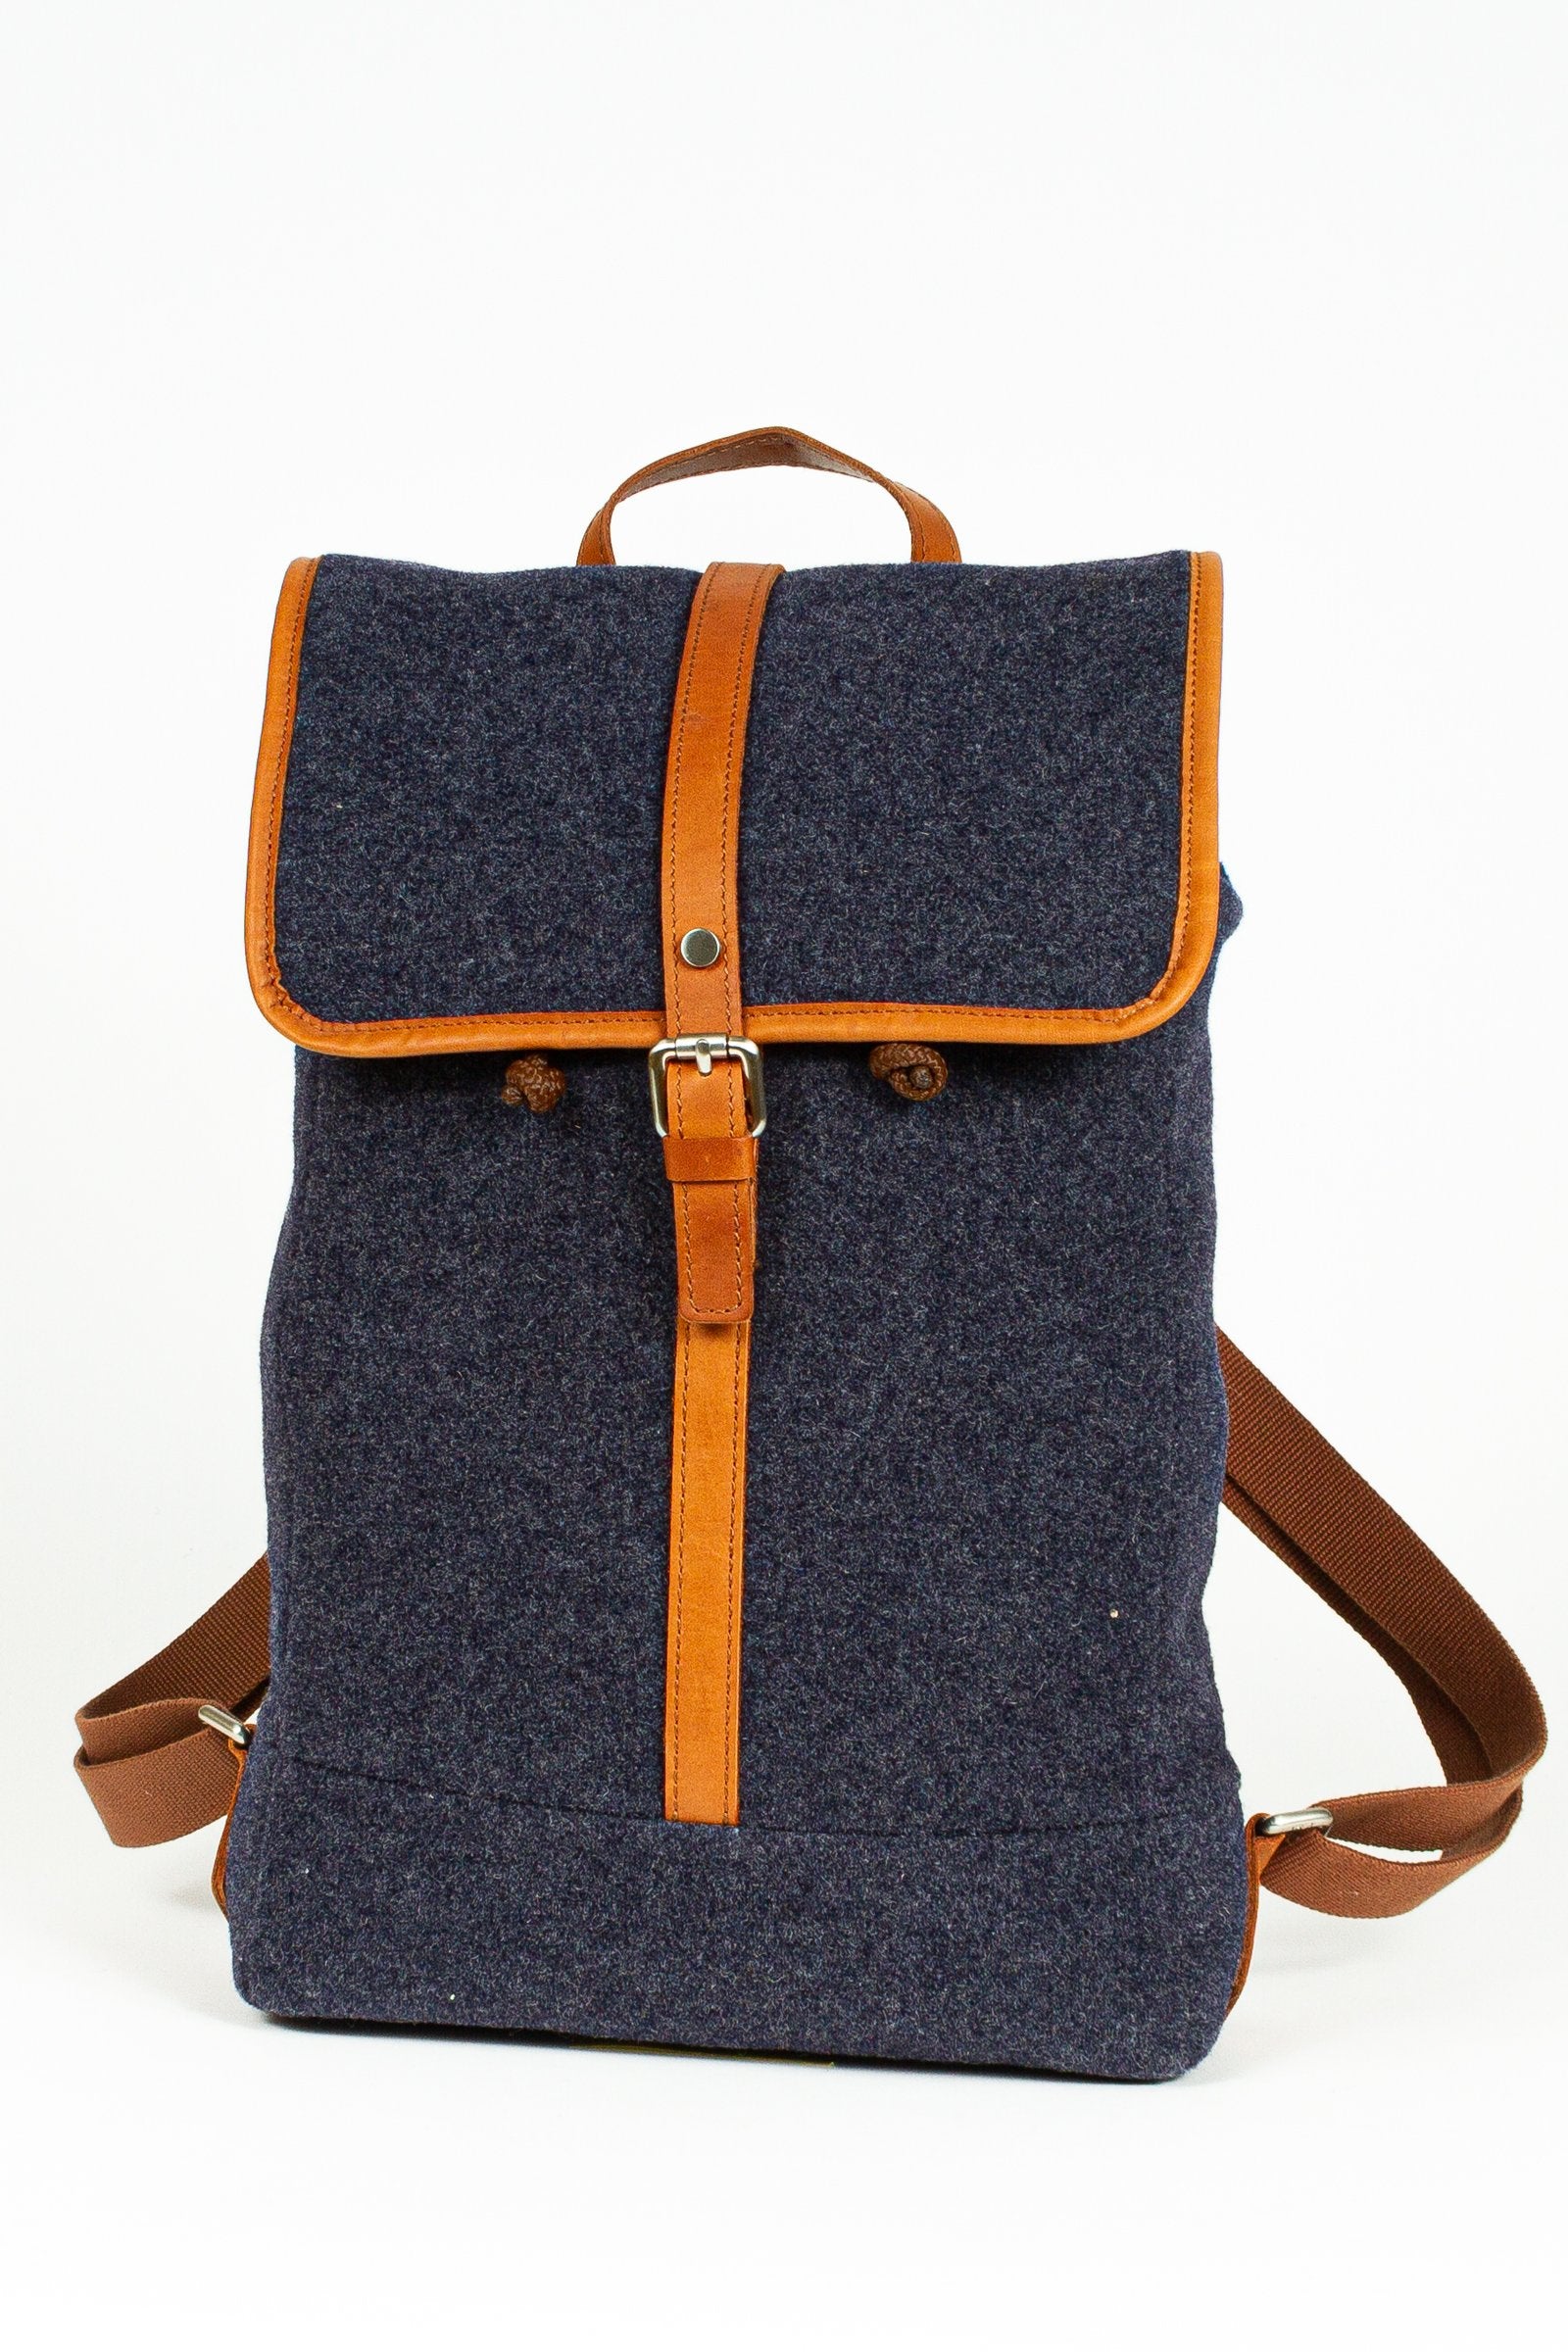 BEON.COM.AU The Jost Farum Square City Daypack is a felt bag made in Europe from premium European leathers and fabrics. Made of wool felt and leather Main compartment fits A4 folders Closes with two-way zipper Padded laptop compartment fits up to 37cm x 27cm x 2cm Zipped compartment Mobile phone pocket 2 pen... Jost at BEON.COM.AU